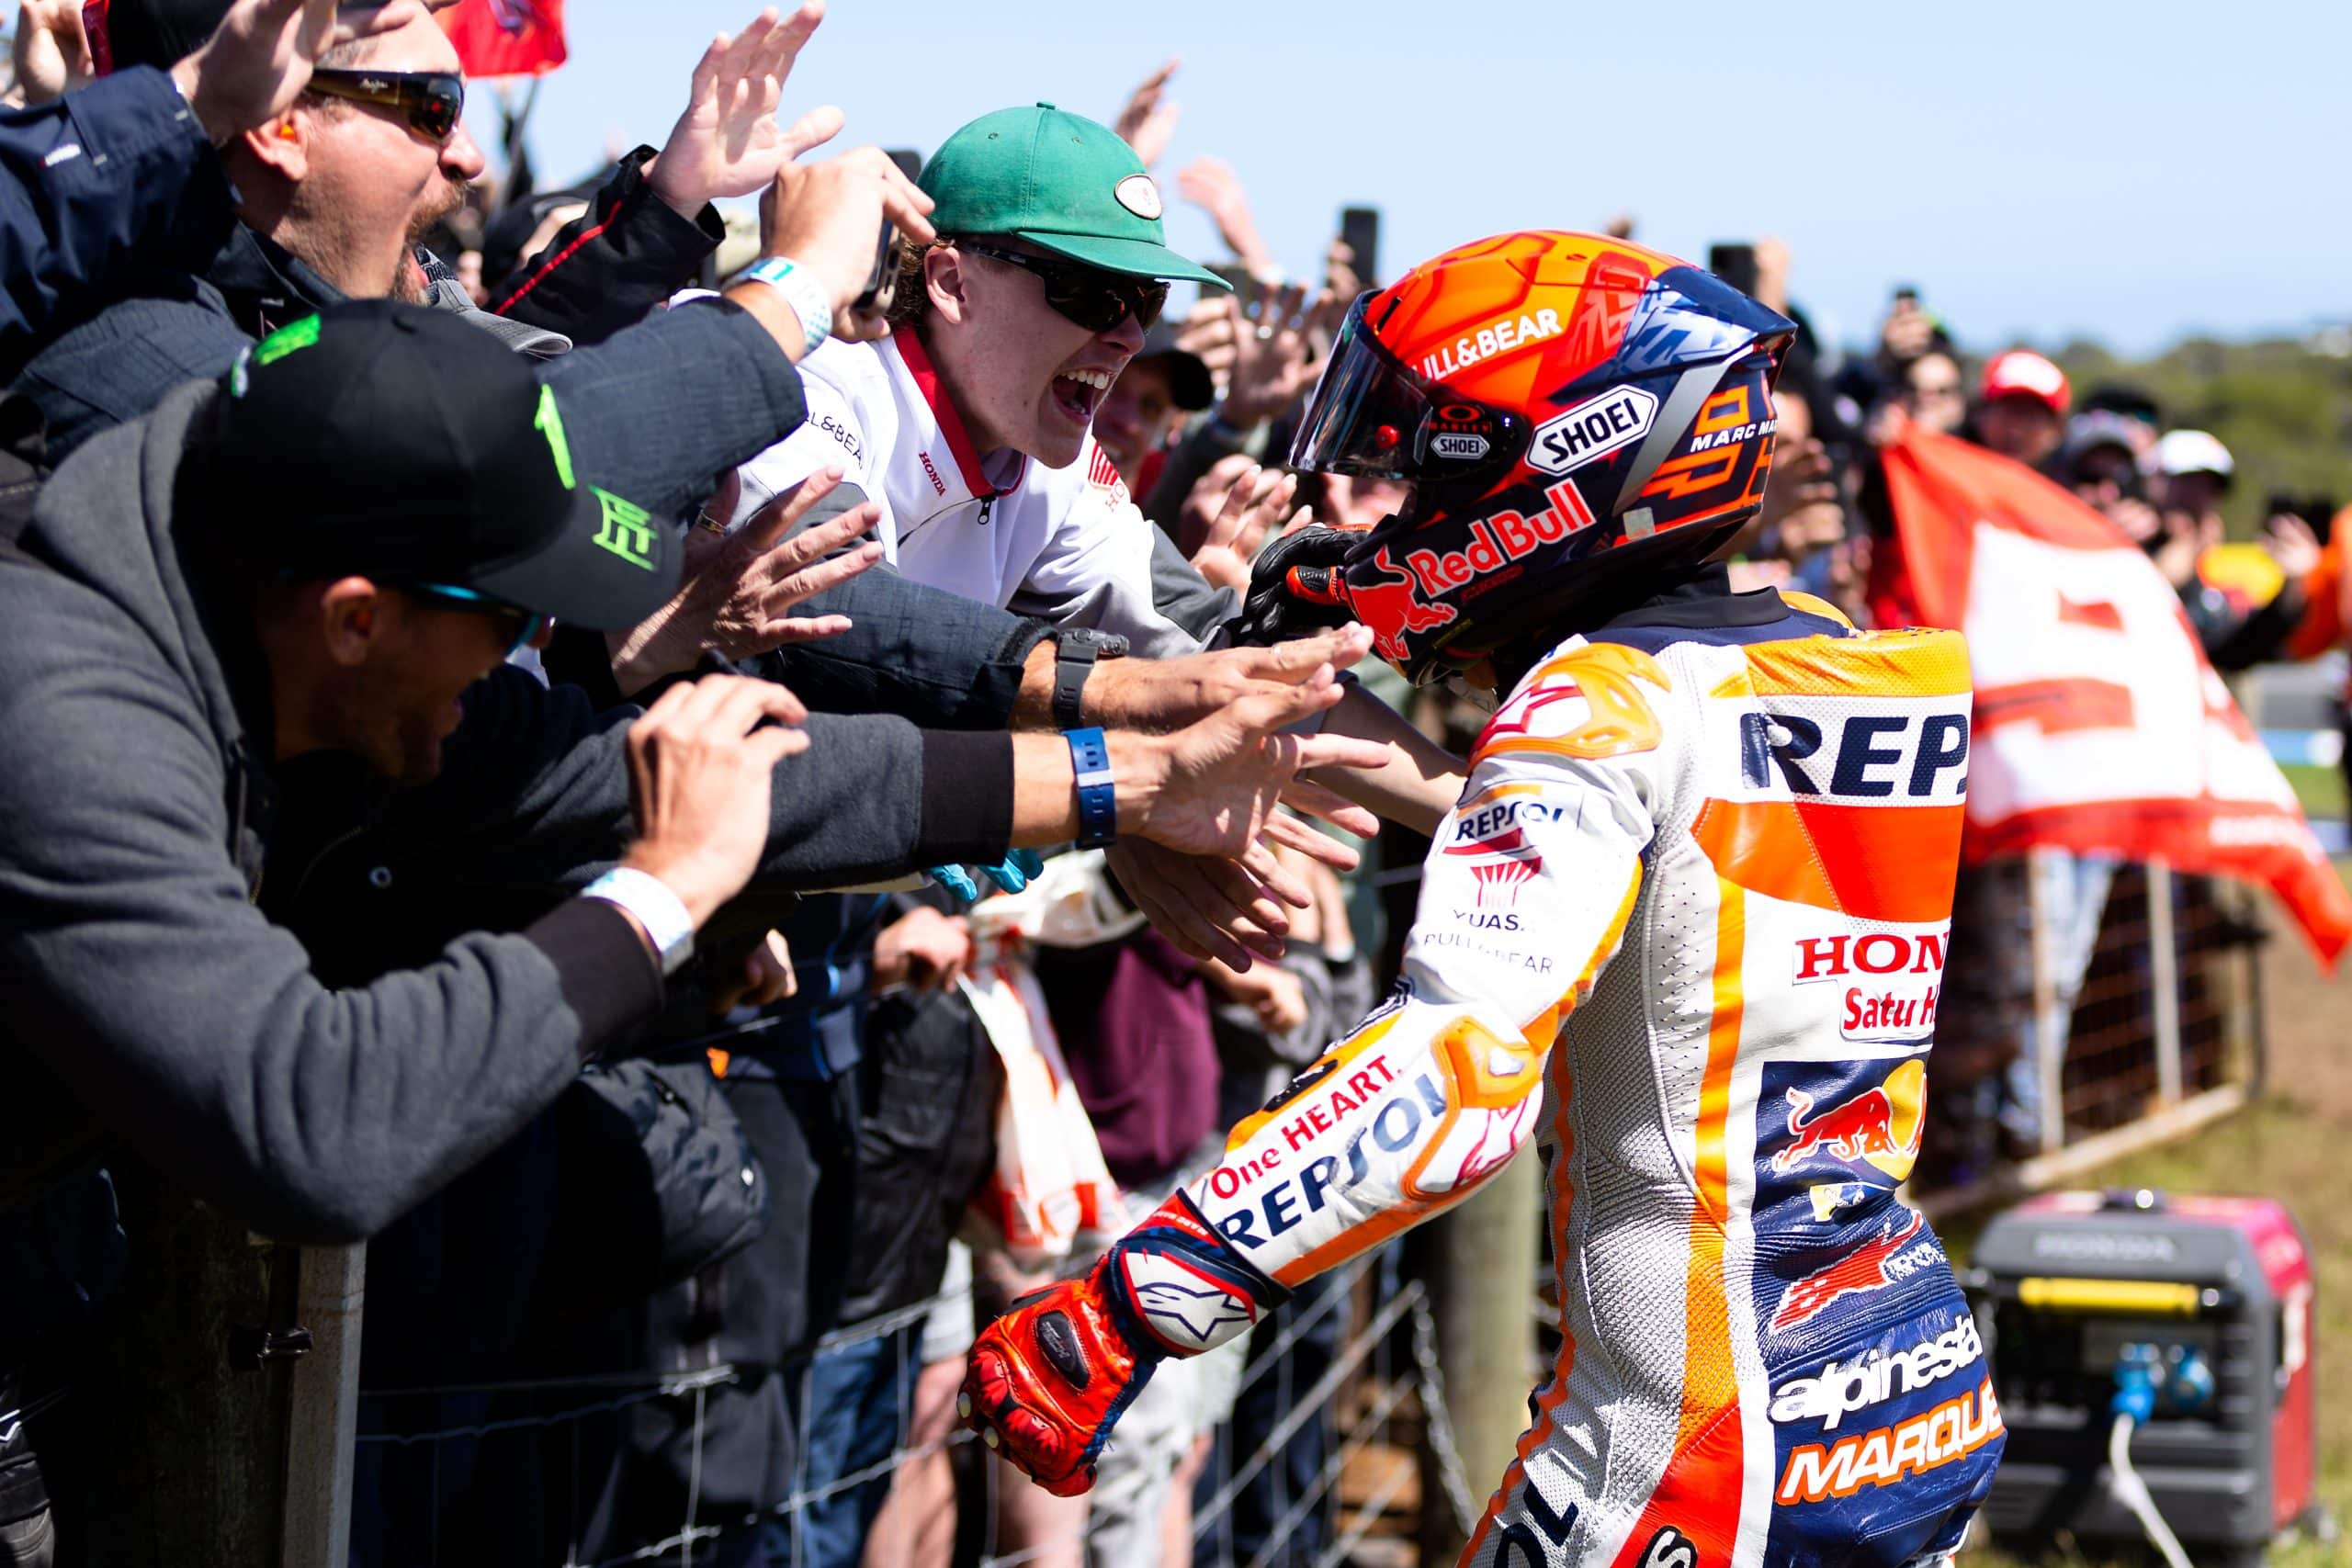 PHILLIP ISLAND, AUSTRALIA - OCTOBER 16: Marc Marquez of Spain on the Repsol Honda Team Honda celebrates with his fans during the MotoGP race at The 2022 Australian MotoGP at The Phillip Island Circuit on October 16, 2022 in Phillip Island, Australia. (Photo by Dave Hewison/Speed Media/Icon Sportswire)